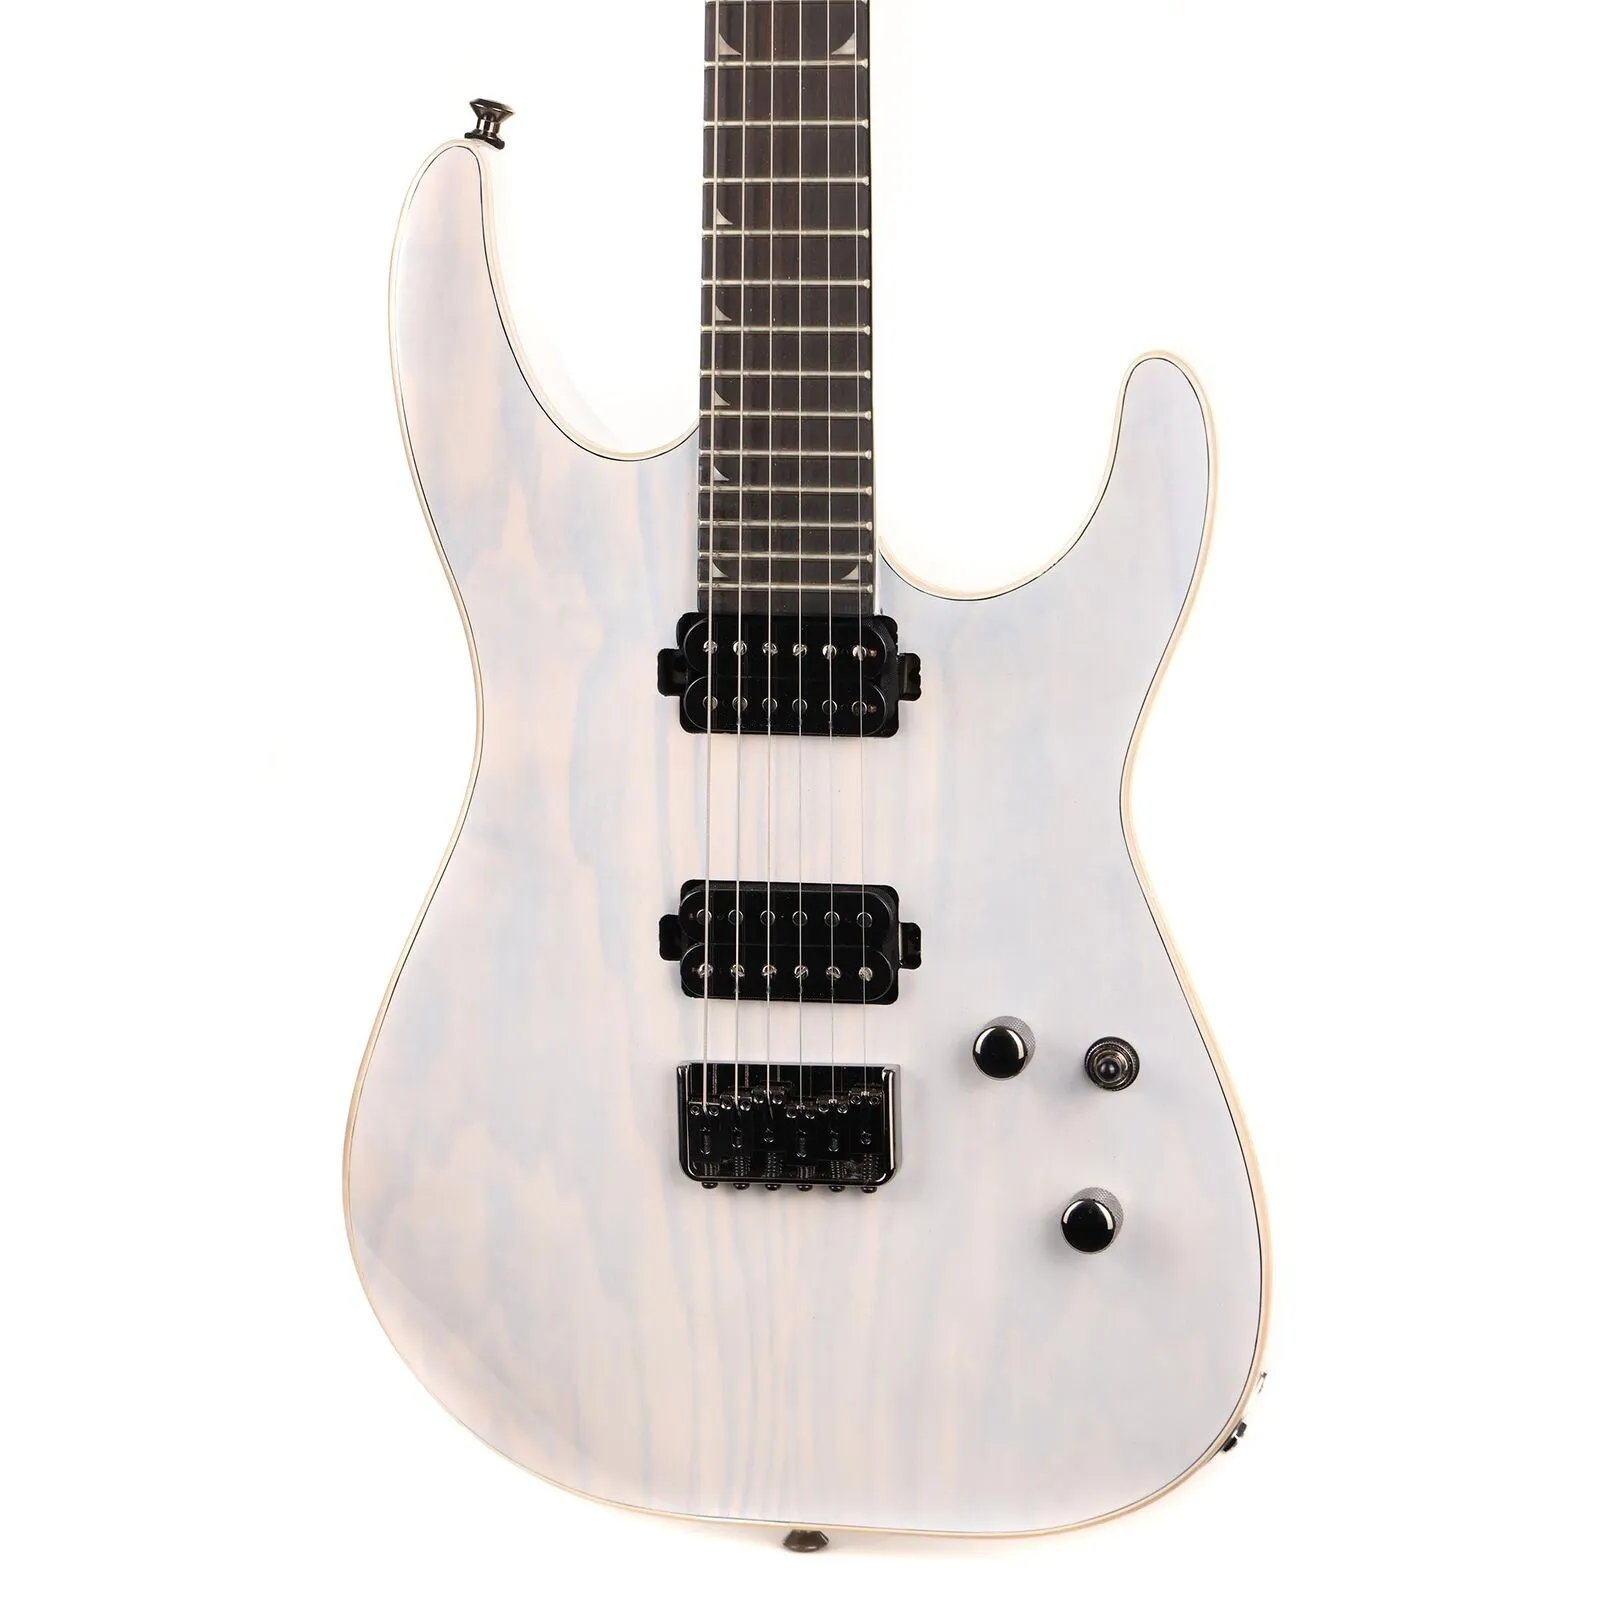 Pro Series Soloist SL2A MAH HT Unicorn White Electric Guitar as same of the pictures